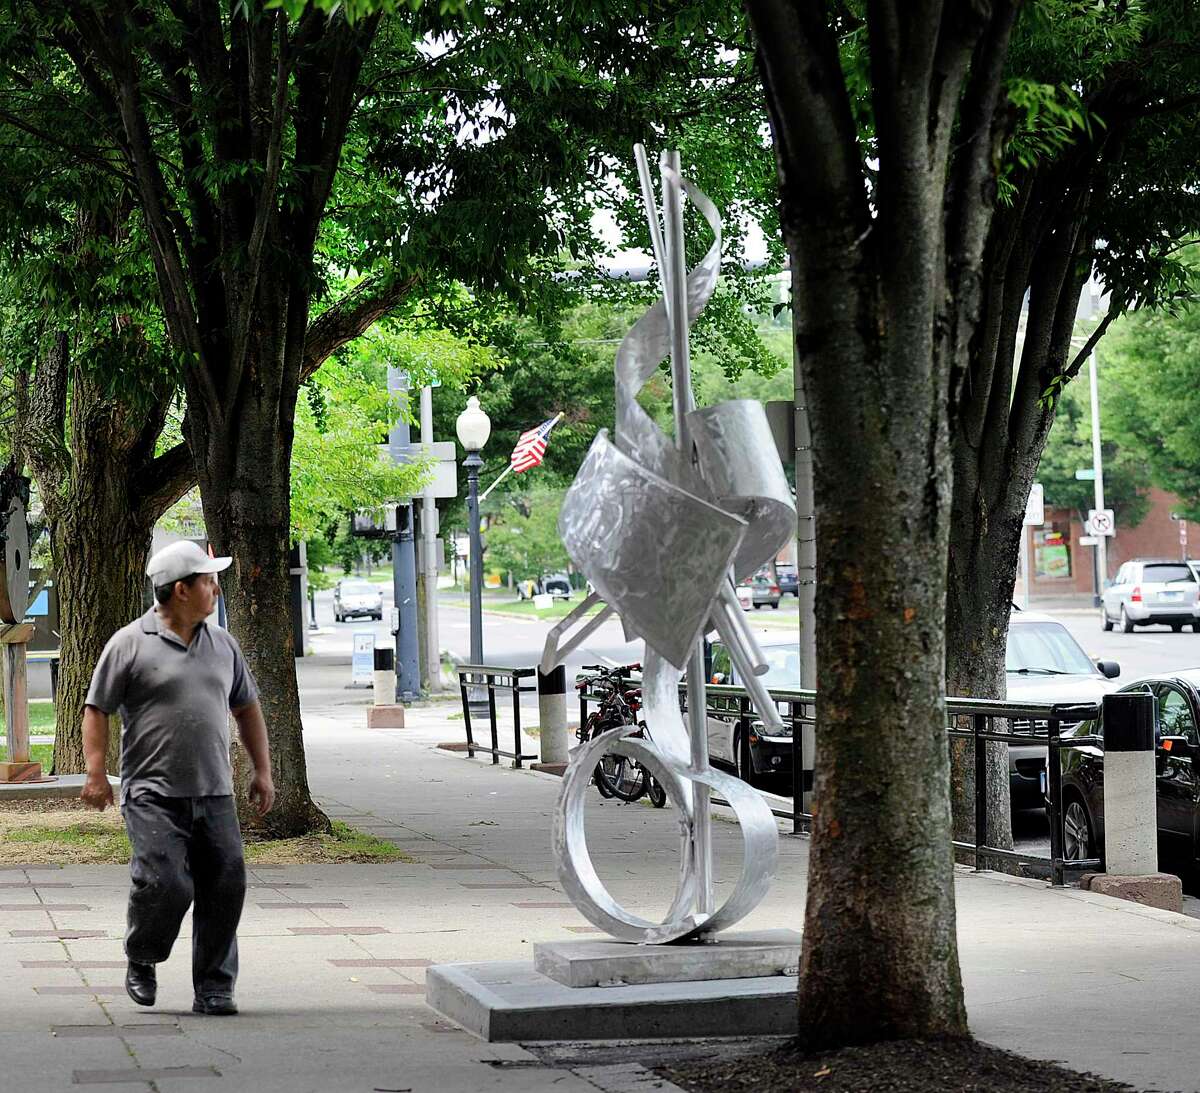 A passerby looks at "Ode to Growth," a sculpture piece by artist Glenn Zweygardt, Thursday, June 29, 2017. The art is part ofv a "sculpture garden" on Main Street in Danbury. Leaders have suggested Danbury created a department focused on the arts and culture.